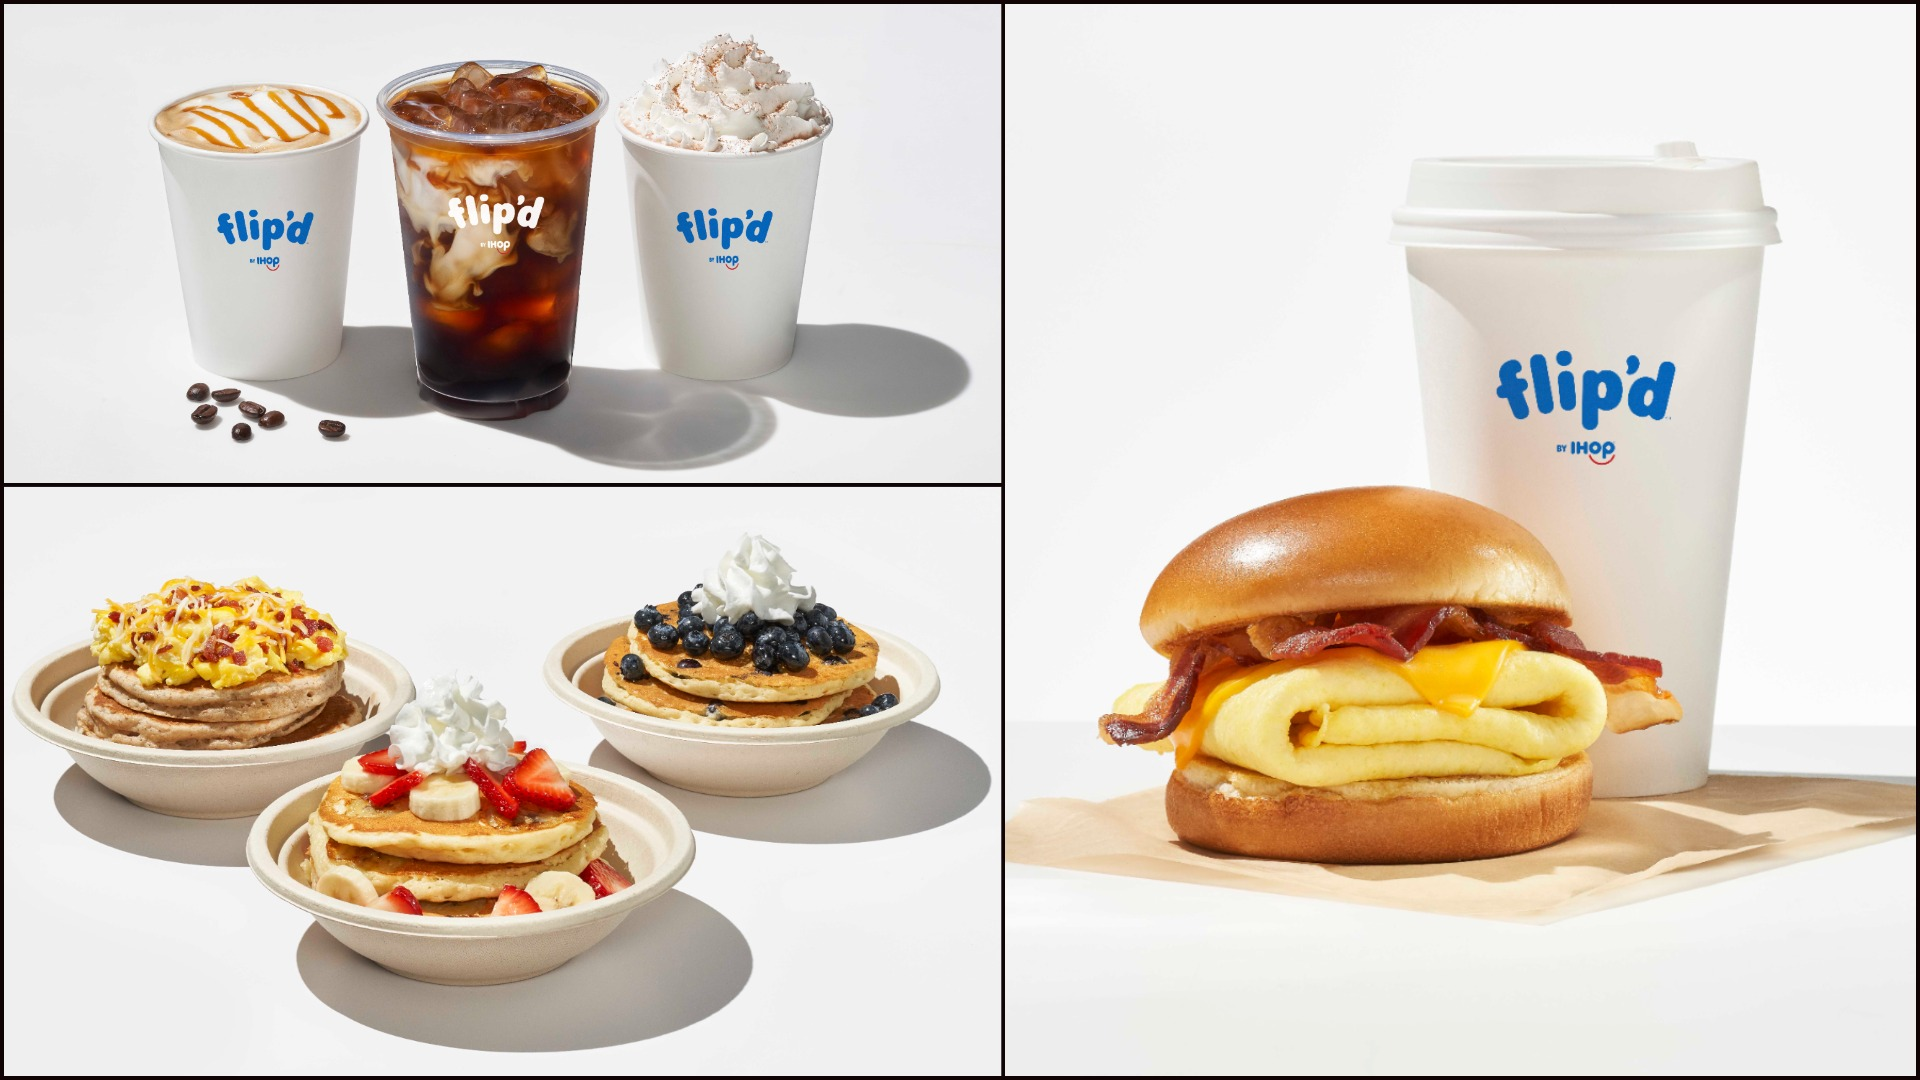 Flip'd coffee, breakfast sandwiches, and pancake bowls [all images provided by IHOP]